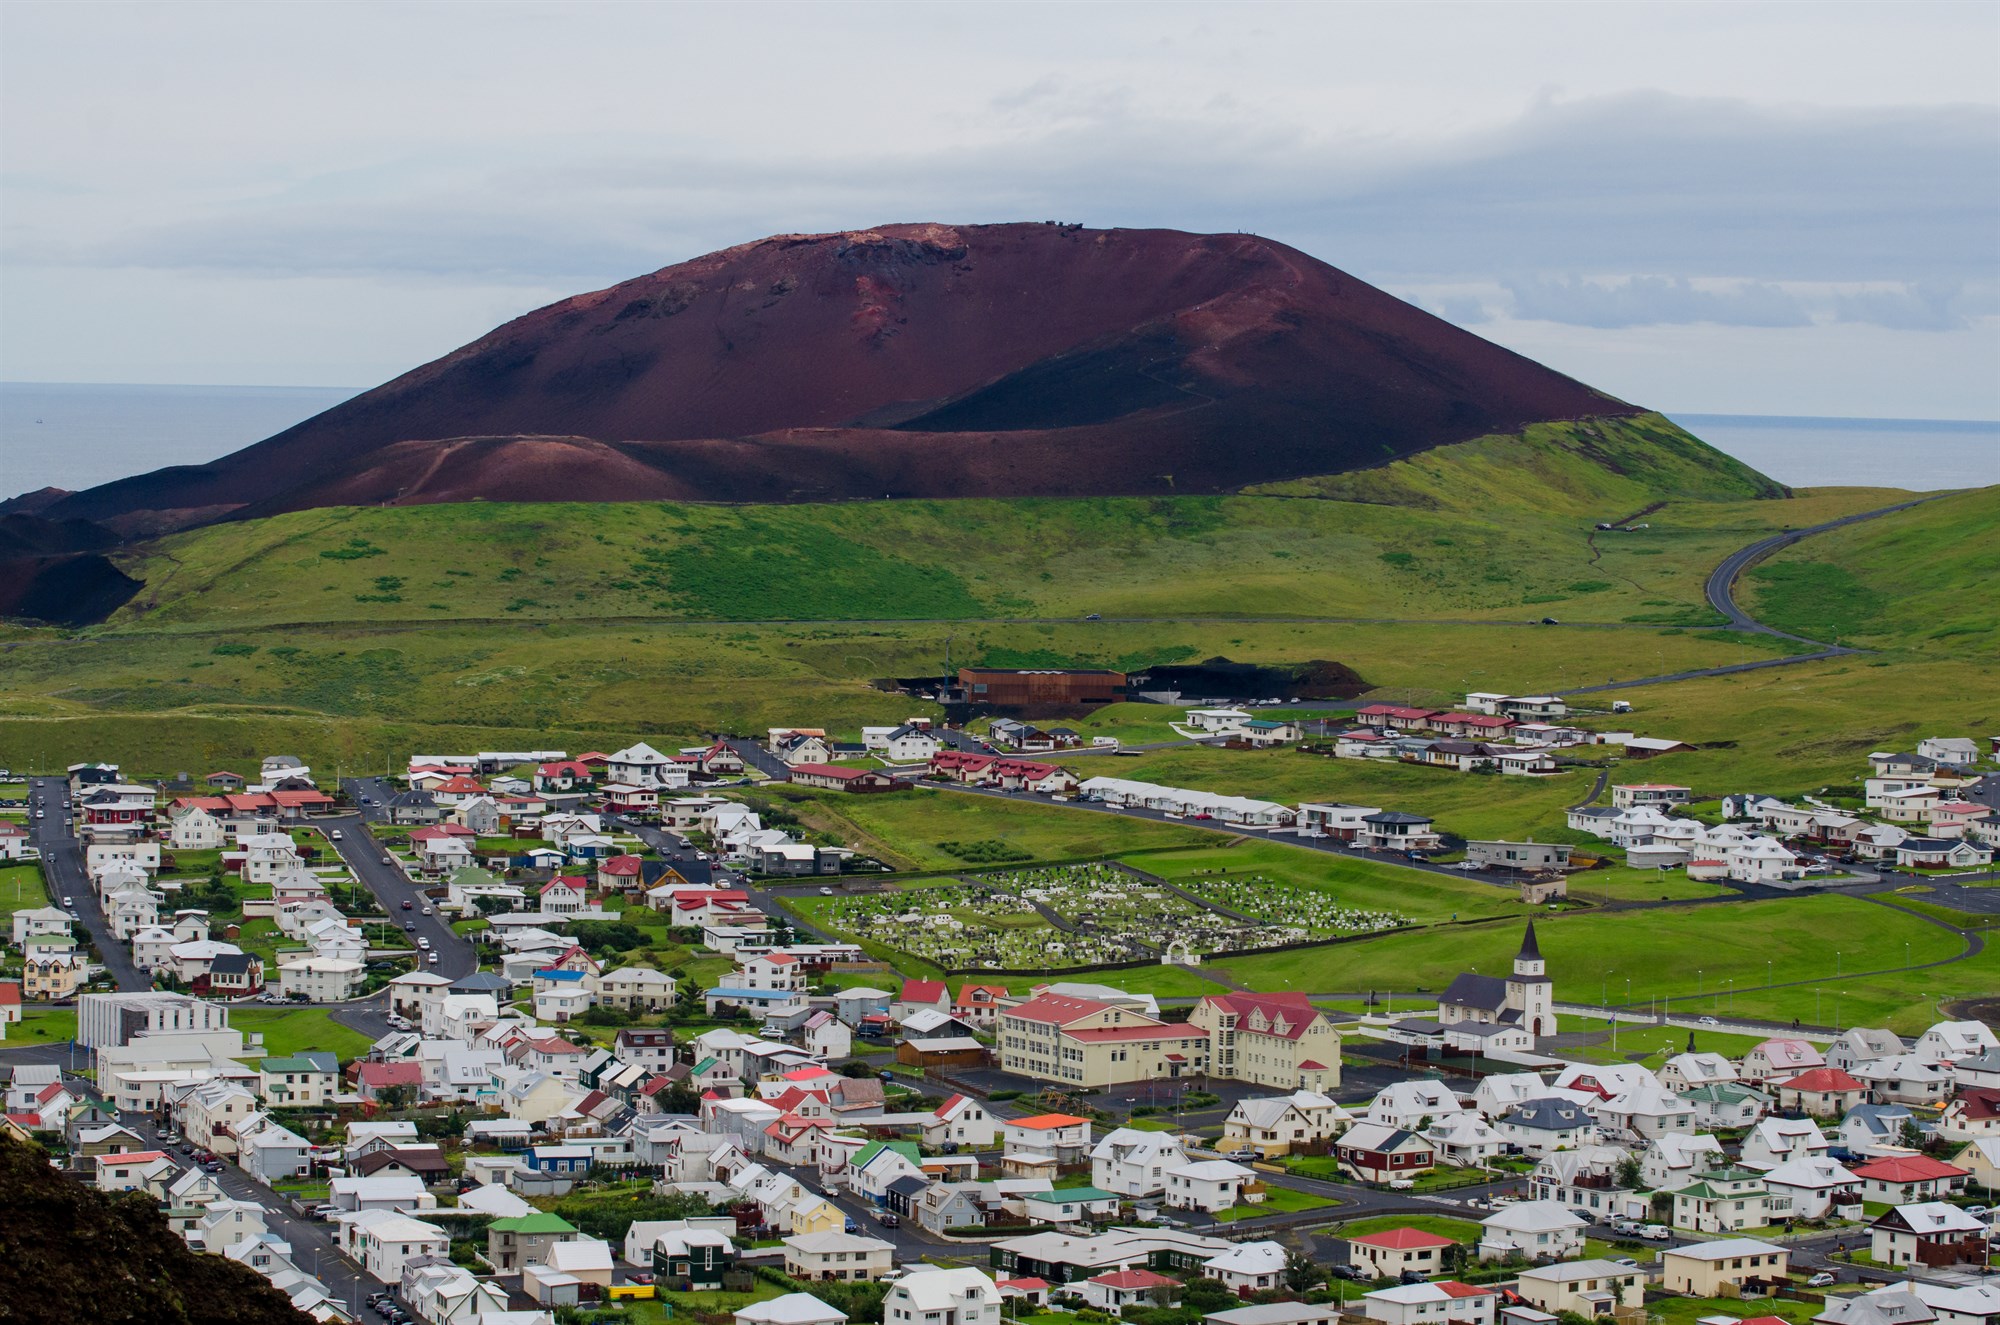 The volcano overlooking the town last erupted in 1973.